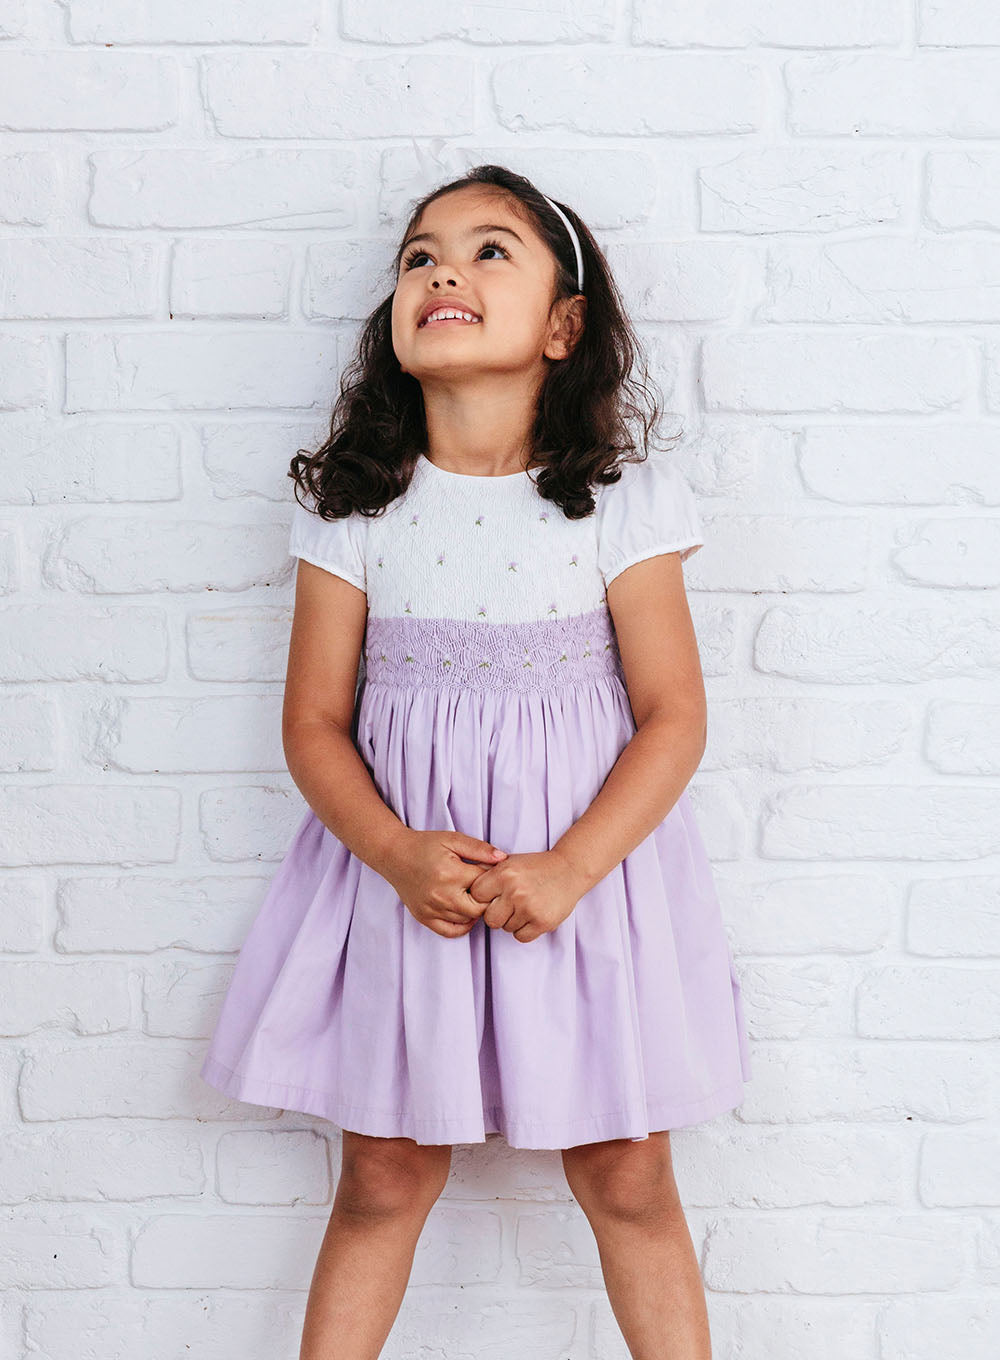 Children's dress of lilac cotton printed in strips of burgundy and white  motifs, frock outerwear children's clothing clothing cotton, textile sewn  (hand) smocked pleated wrinkled Girls dress of lilac cotton with print